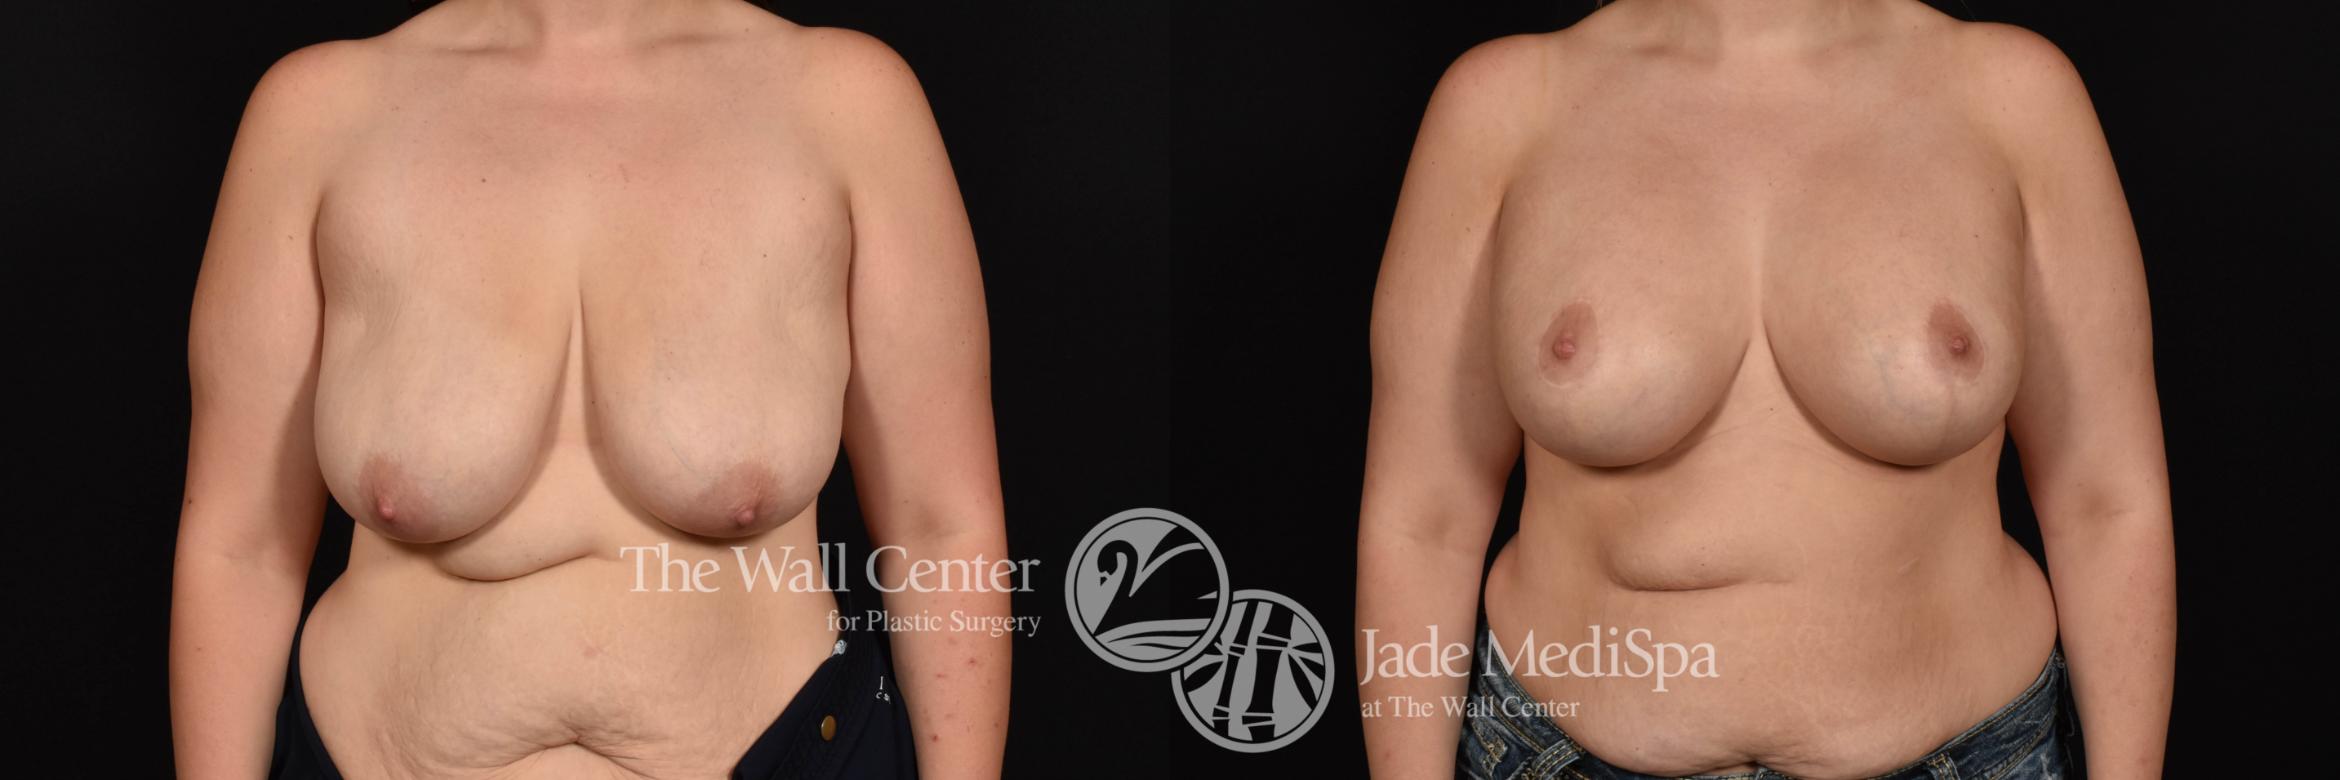 Breast Aug with Lift and SAFELipo to Axillae Front Photo, Shreveport, Louisiana, The Wall Center for Plastic Surgery, Case 938